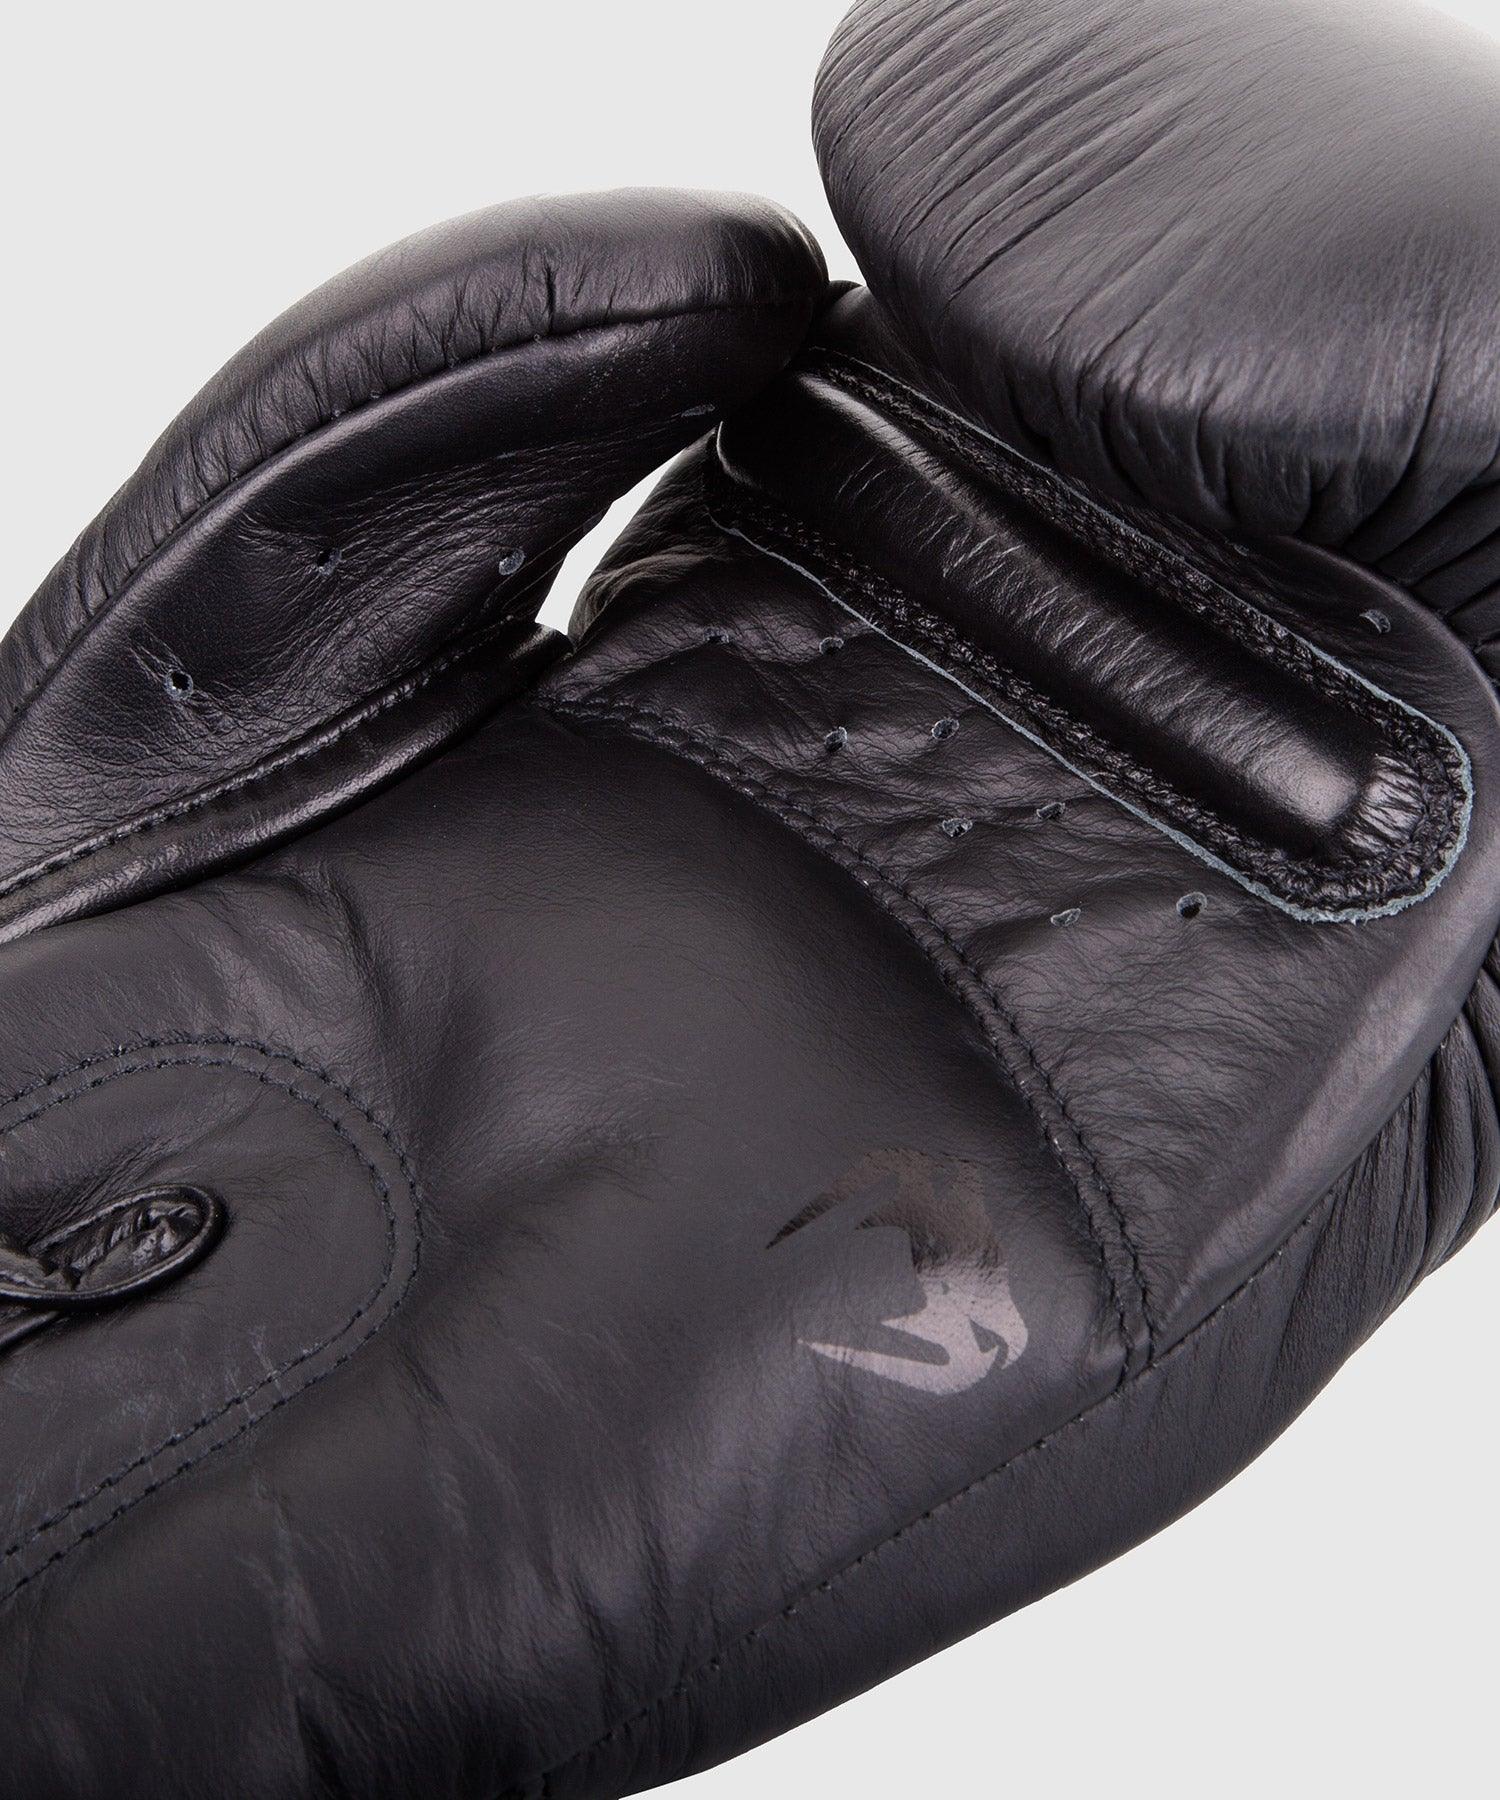 Venum Giant 3.0 Boxing Gloves - Nappa Leather - Black/Black Picture 3